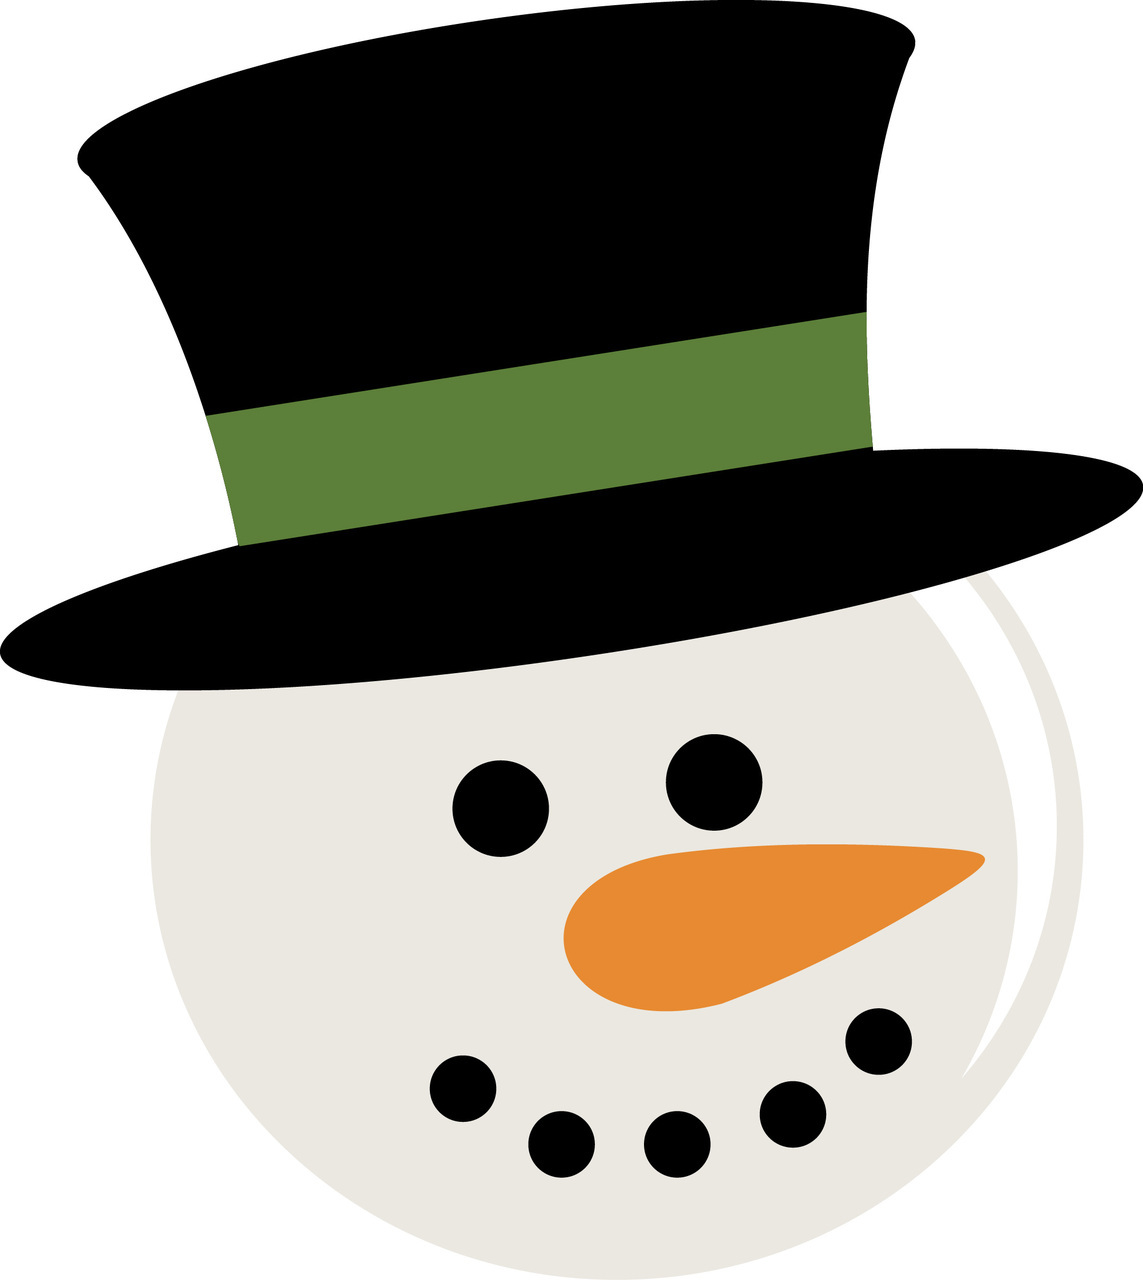 Snowman Image Free Free download on ClipArtMag